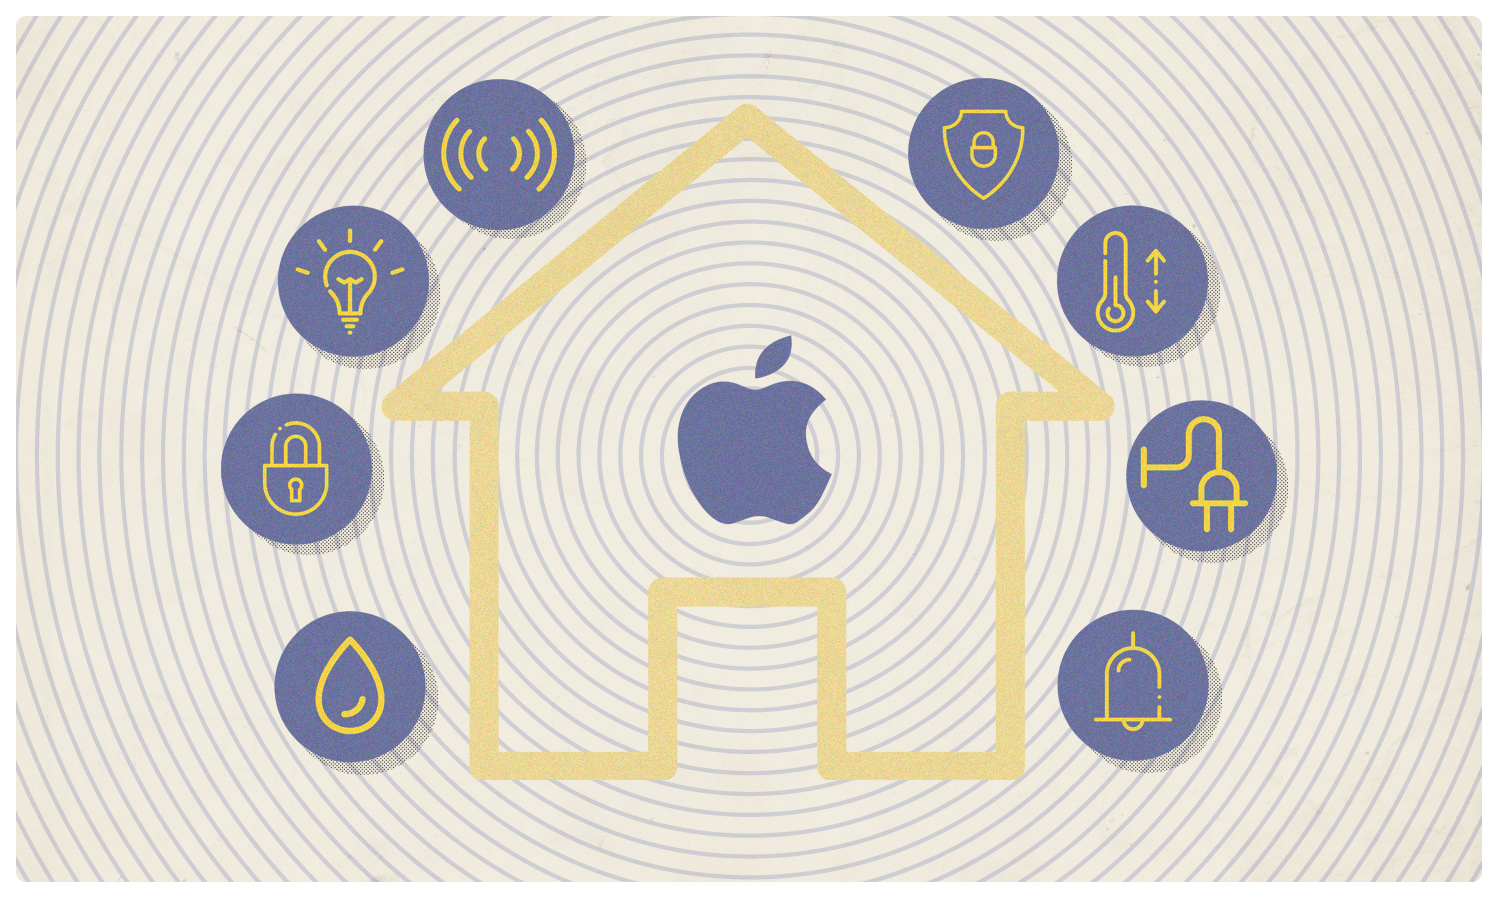 Apple's Homekit Makes it Easy to Get Started with Home Automation